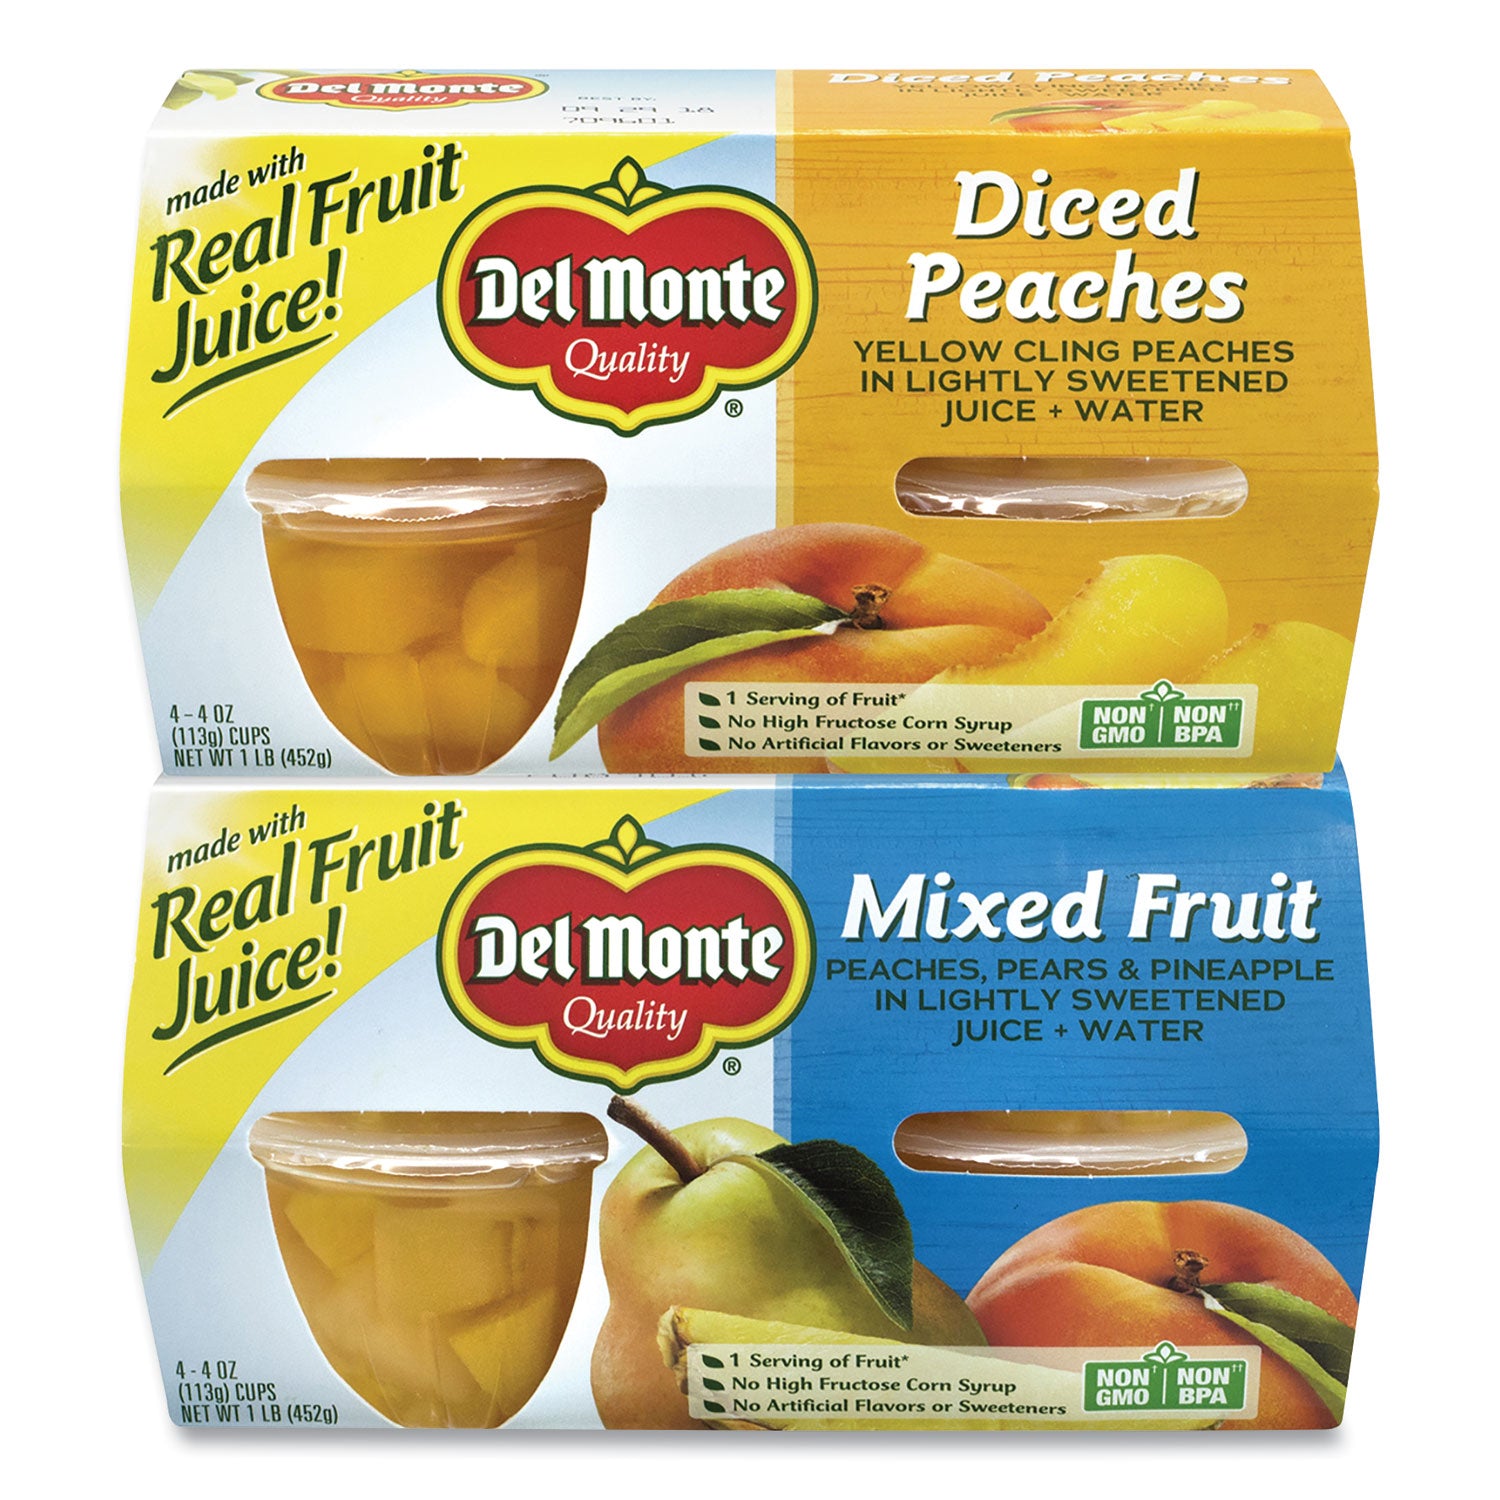 diced-peaches-and-mixed-fruit-cups-4-oz-cups-16-cups-carton-ships-in-1-3-business-days_grr22000744 - 1